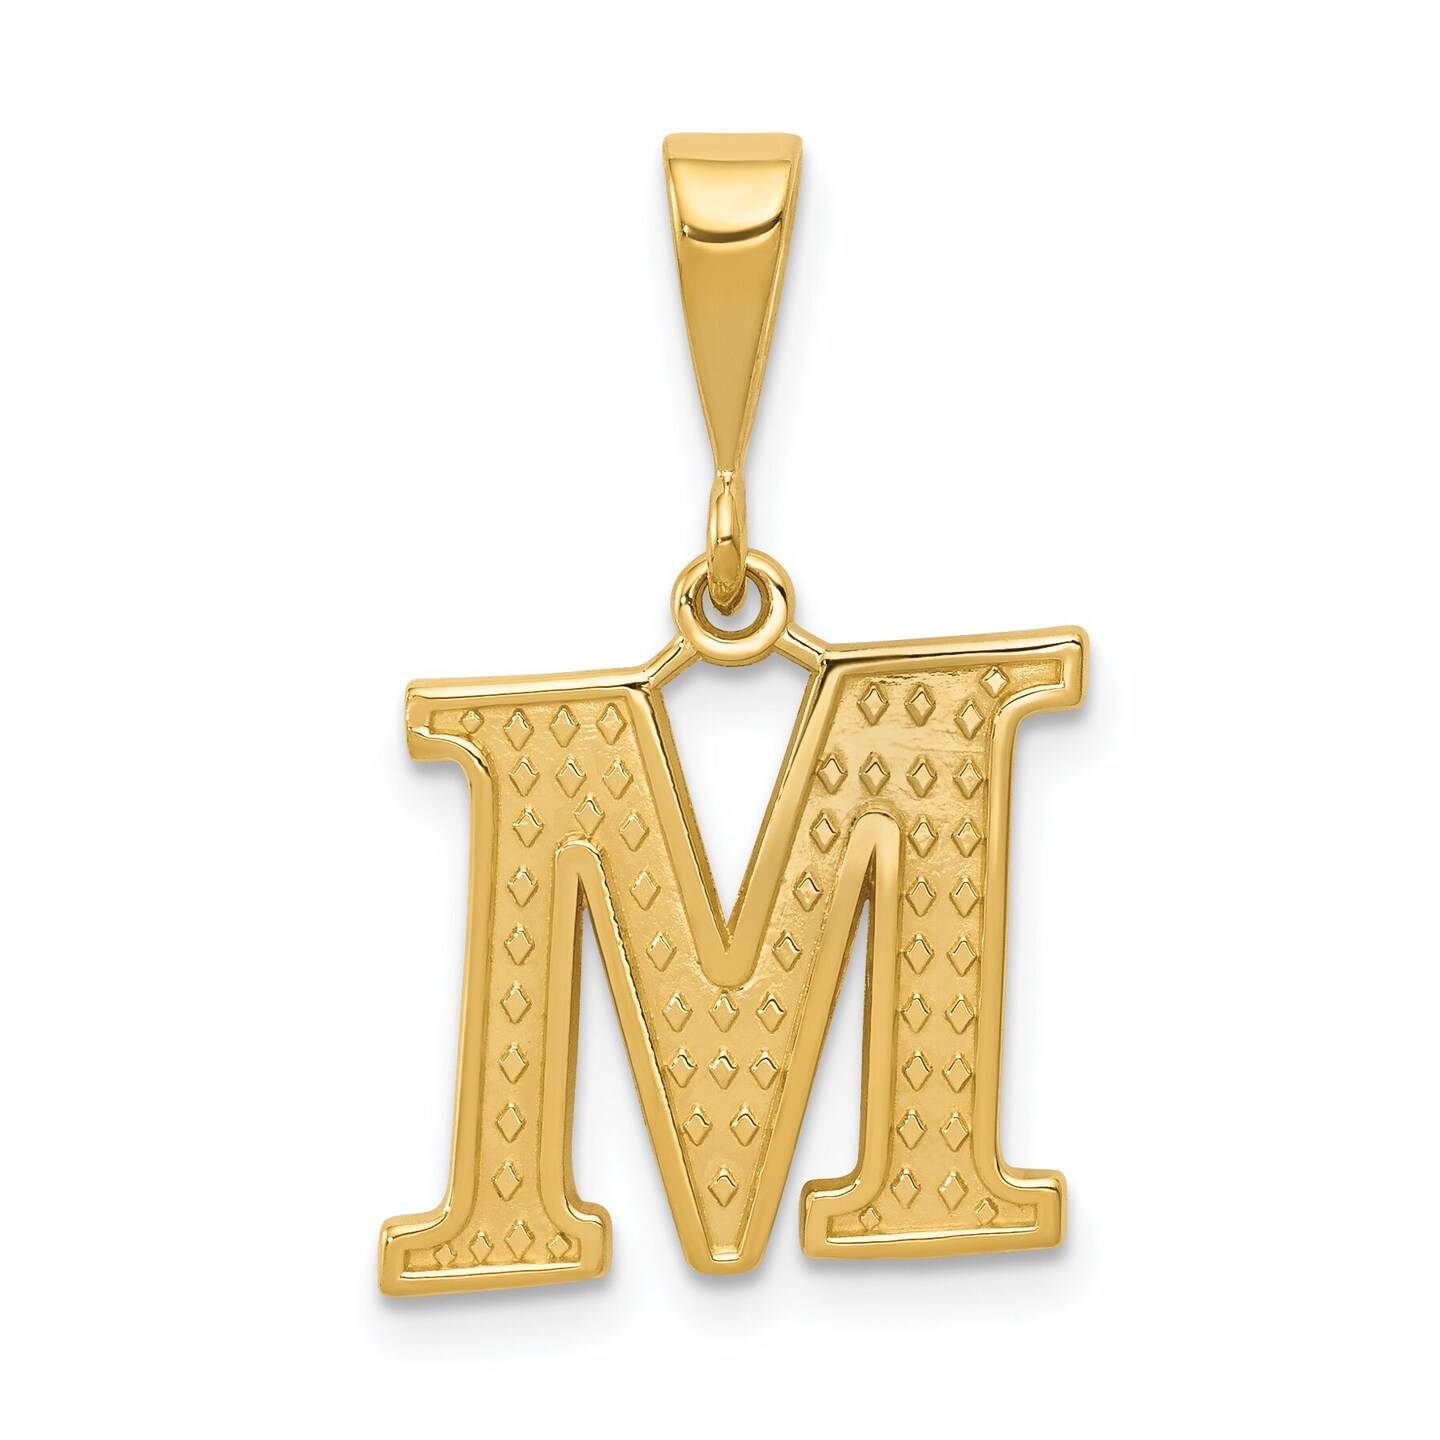 14K SOLID YELLOW GOLD INITIAL NECKLACE, LETTER M NECKLACE | eBay